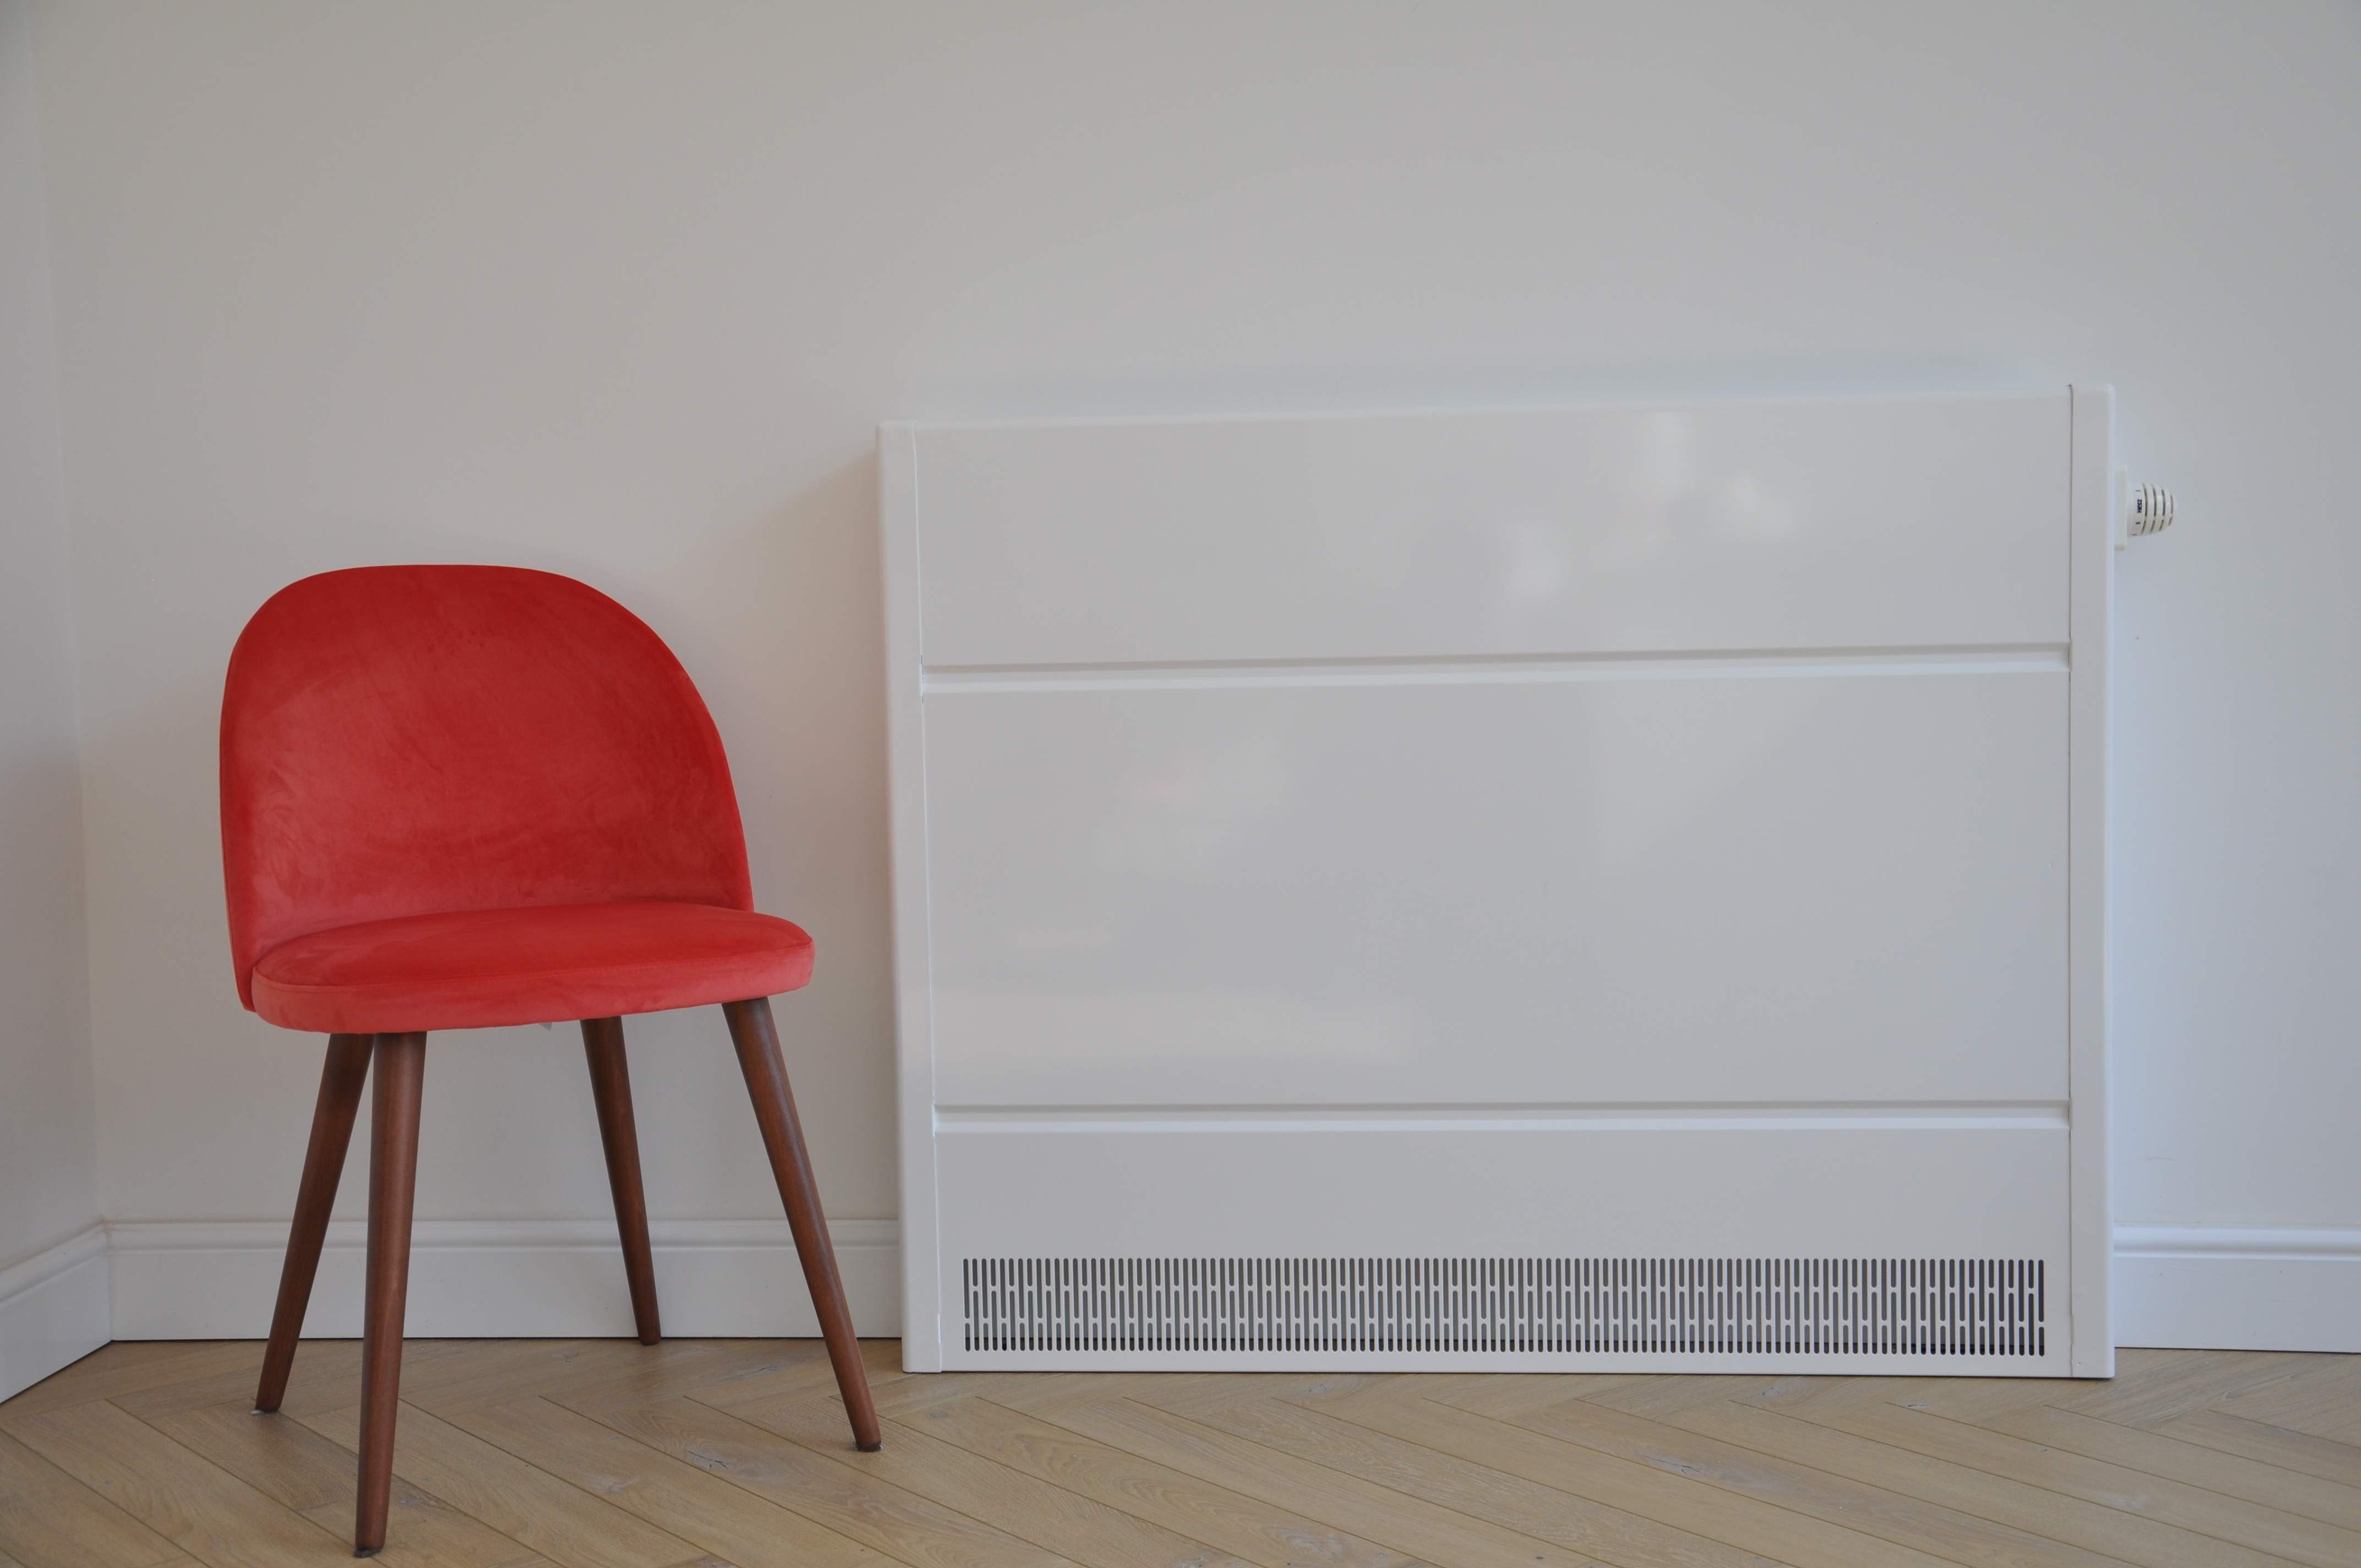 covora lite lst radiator next to a red chair